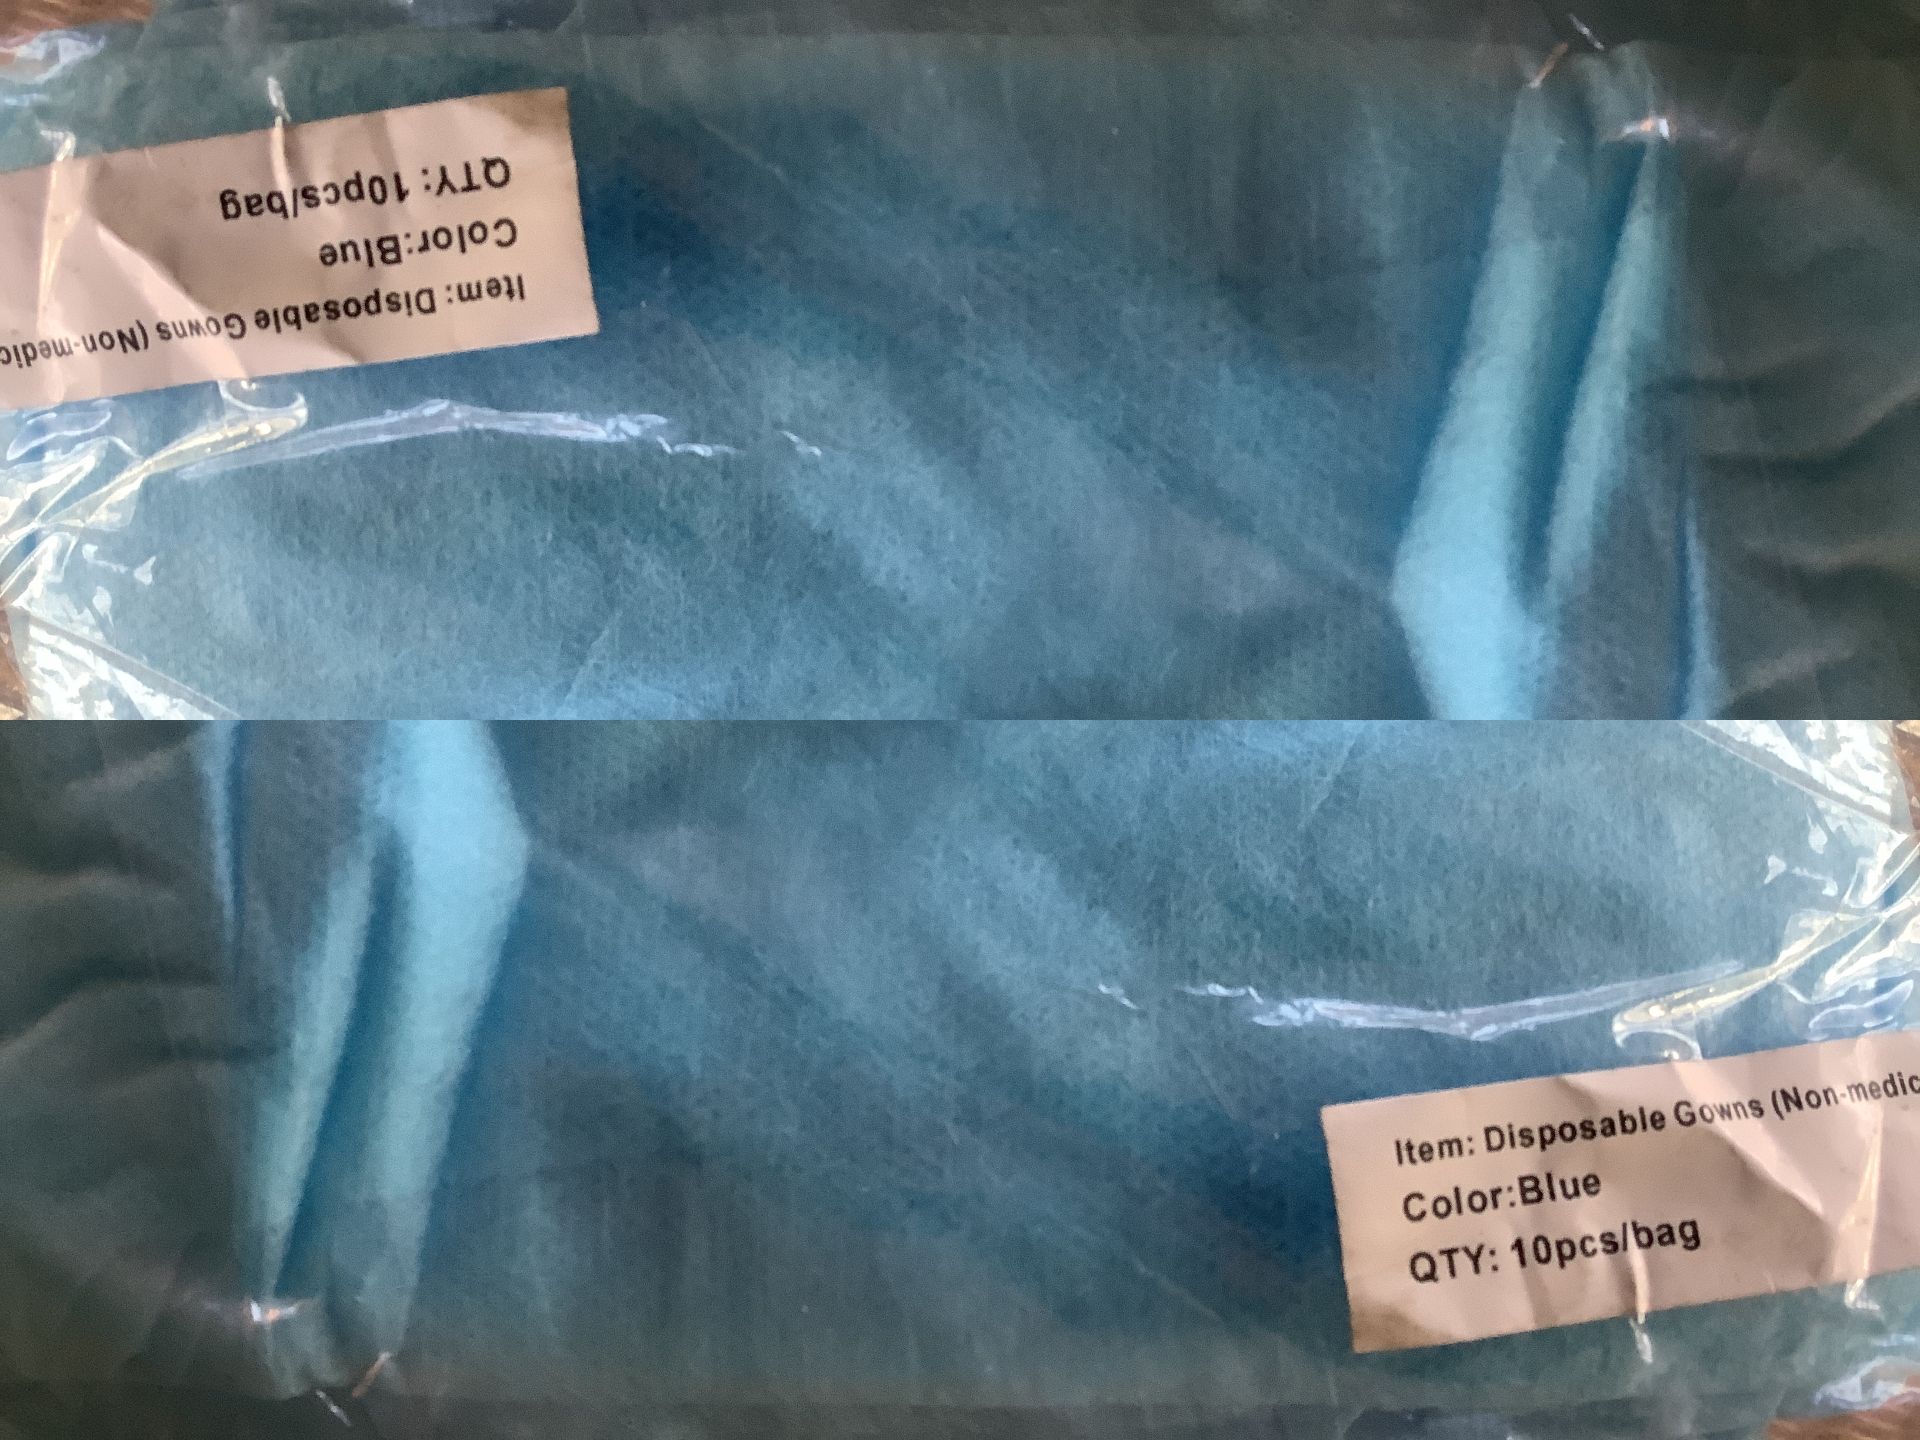 100 x Disposable Gowns Blue (None Medical)